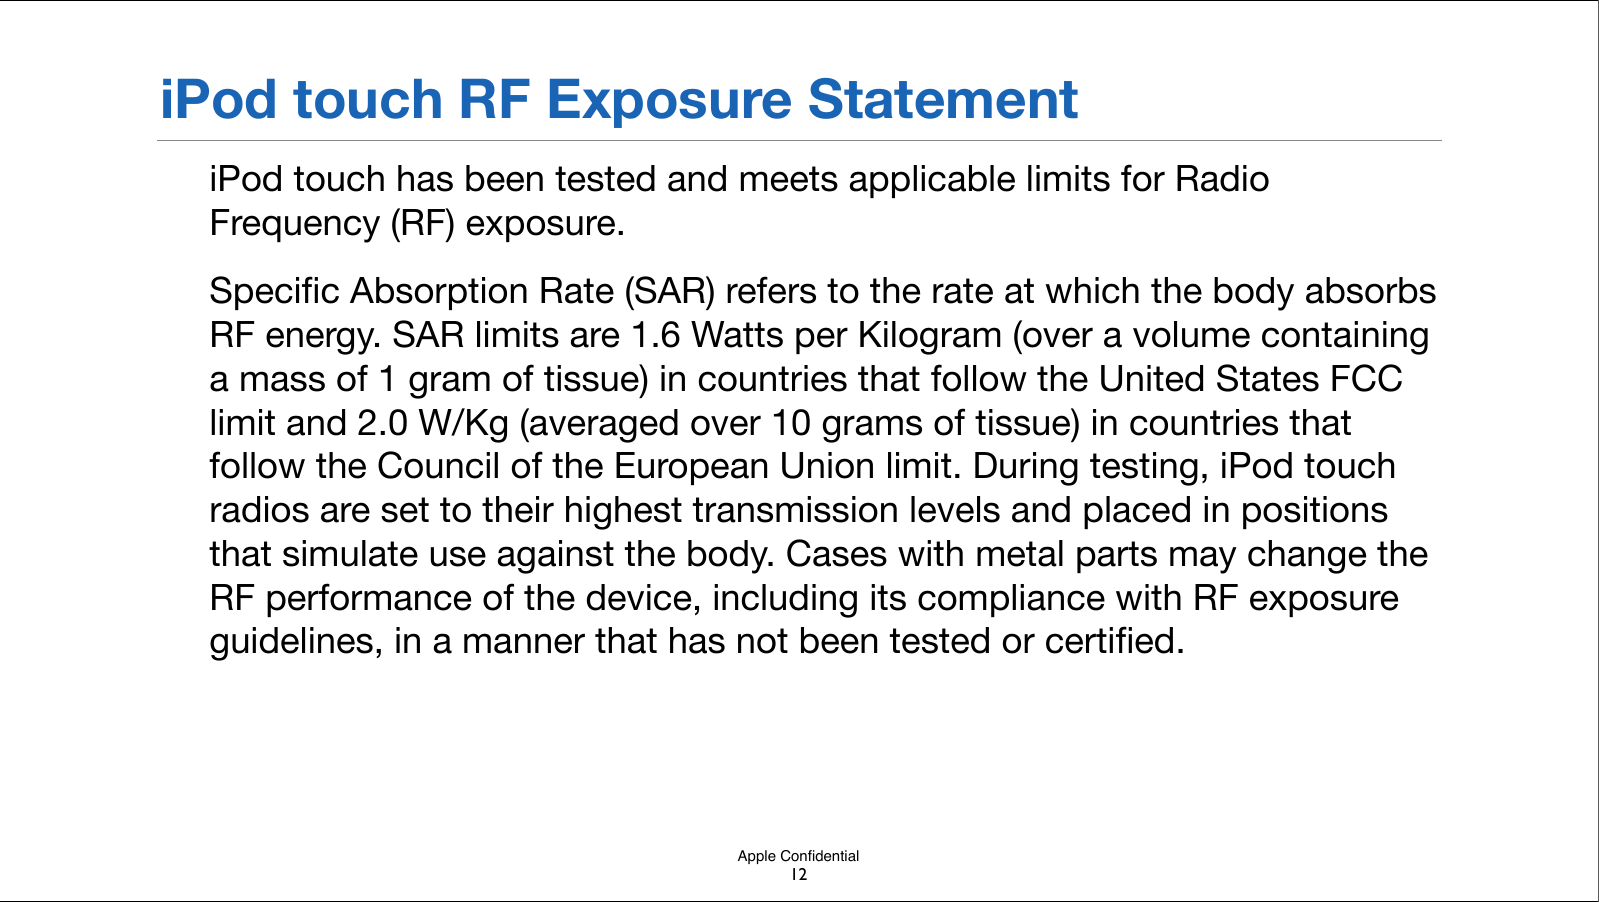 Apple ConﬁdentialiPod touch RF Exposure StatementiPod touch has been tested and meets applicable limits for Radio Frequency (RF) exposure.Speciﬁc Absorption Rate (SAR) refers to the rate at which the body absorbs RF energy. SAR limits are 1.6 Watts per Kilogram (over a volume containing a mass of 1 gram of tissue) in countries that follow the United States FCC limit and 2.0 W/Kg (averaged over 10 grams of tissue) in countries that follow the Council of the European Union limit. During testing, iPod touch radios are set to their highest transmission levels and placed in positions that simulate use against the body. Cases with metal parts may change the RF performance of the device, including its compliance with RF exposure guidelines, in a manner that has not been!tested or certiﬁed.12